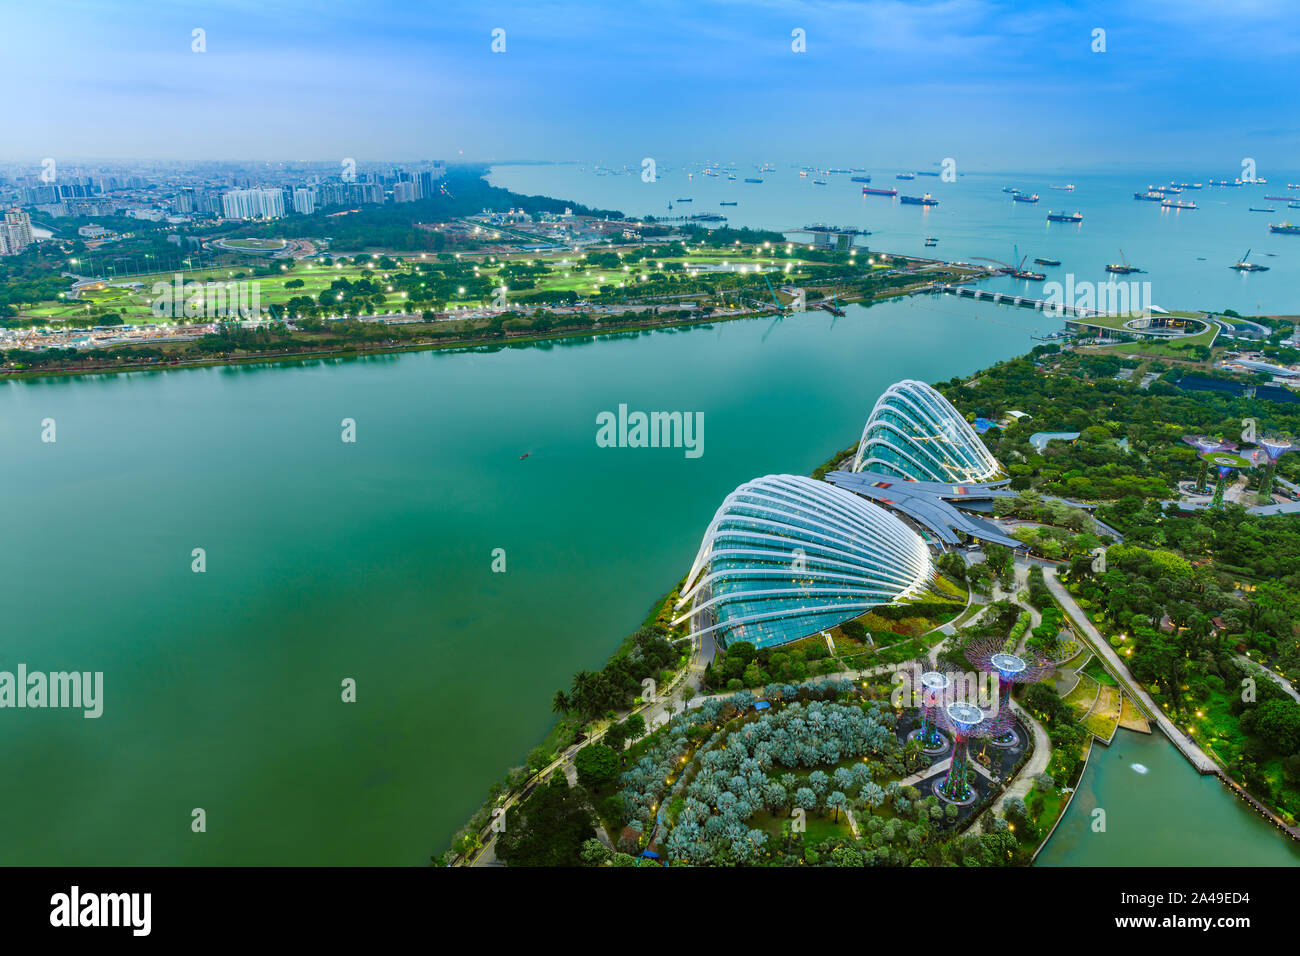 Singapore Gardens by the Bay botanical gardens aerial view and Marina Barrage dam with ship tankers in open sea. Stock Photo